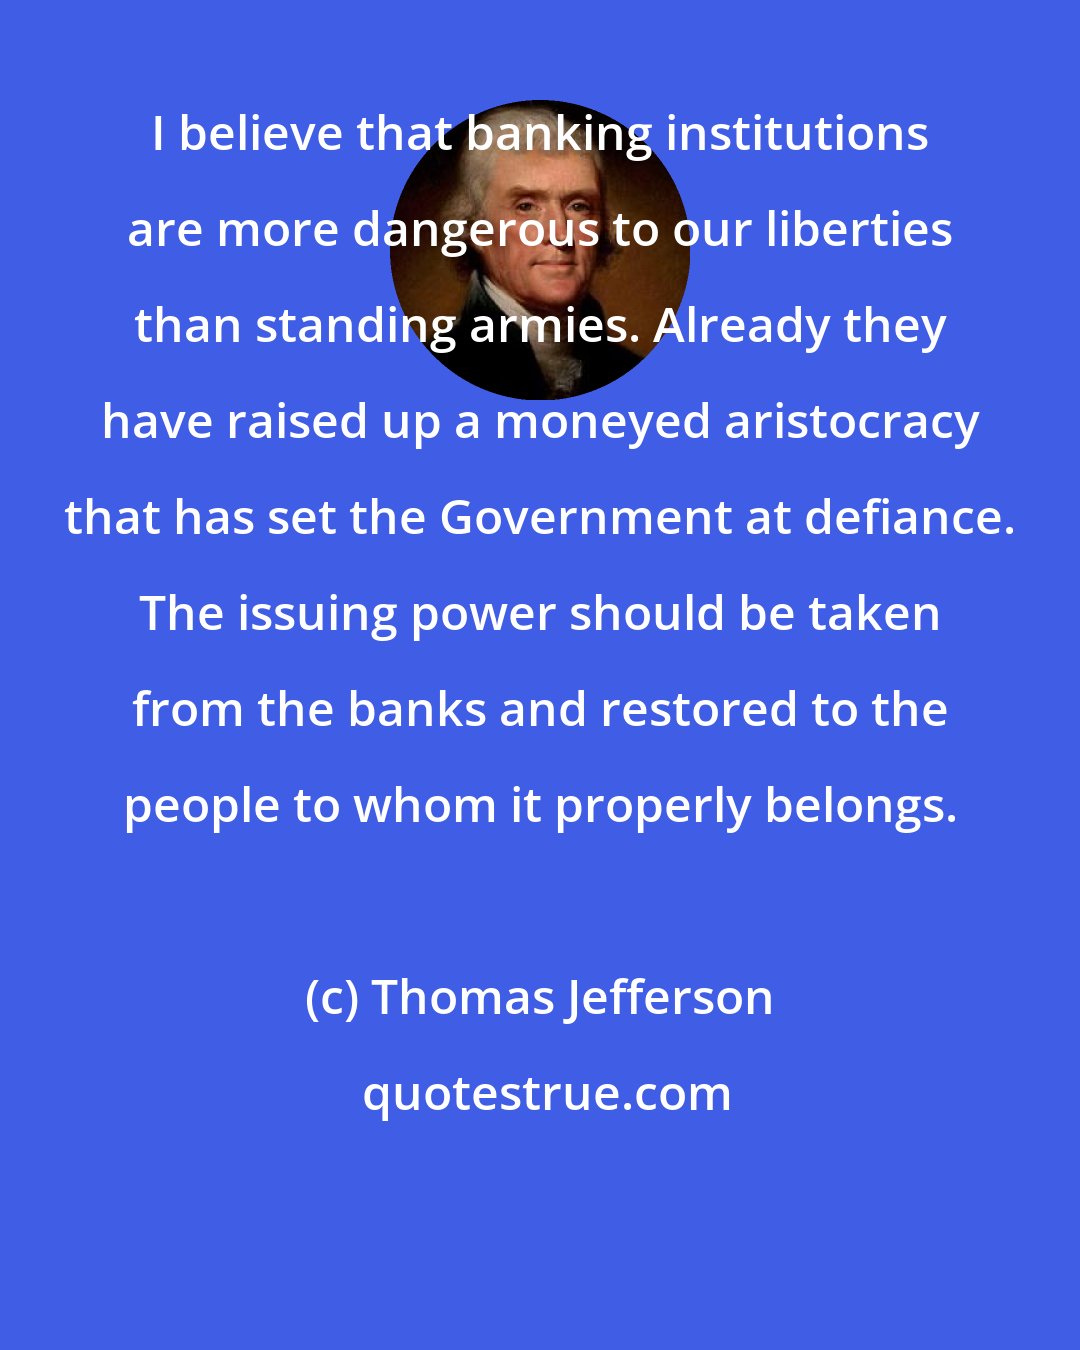 Thomas Jefferson: I believe that banking institutions are more dangerous to our liberties than standing armies. Already they have raised up a moneyed aristocracy that has set the Government at defiance. The issuing power should be taken from the banks and restored to the people to whom it properly belongs.